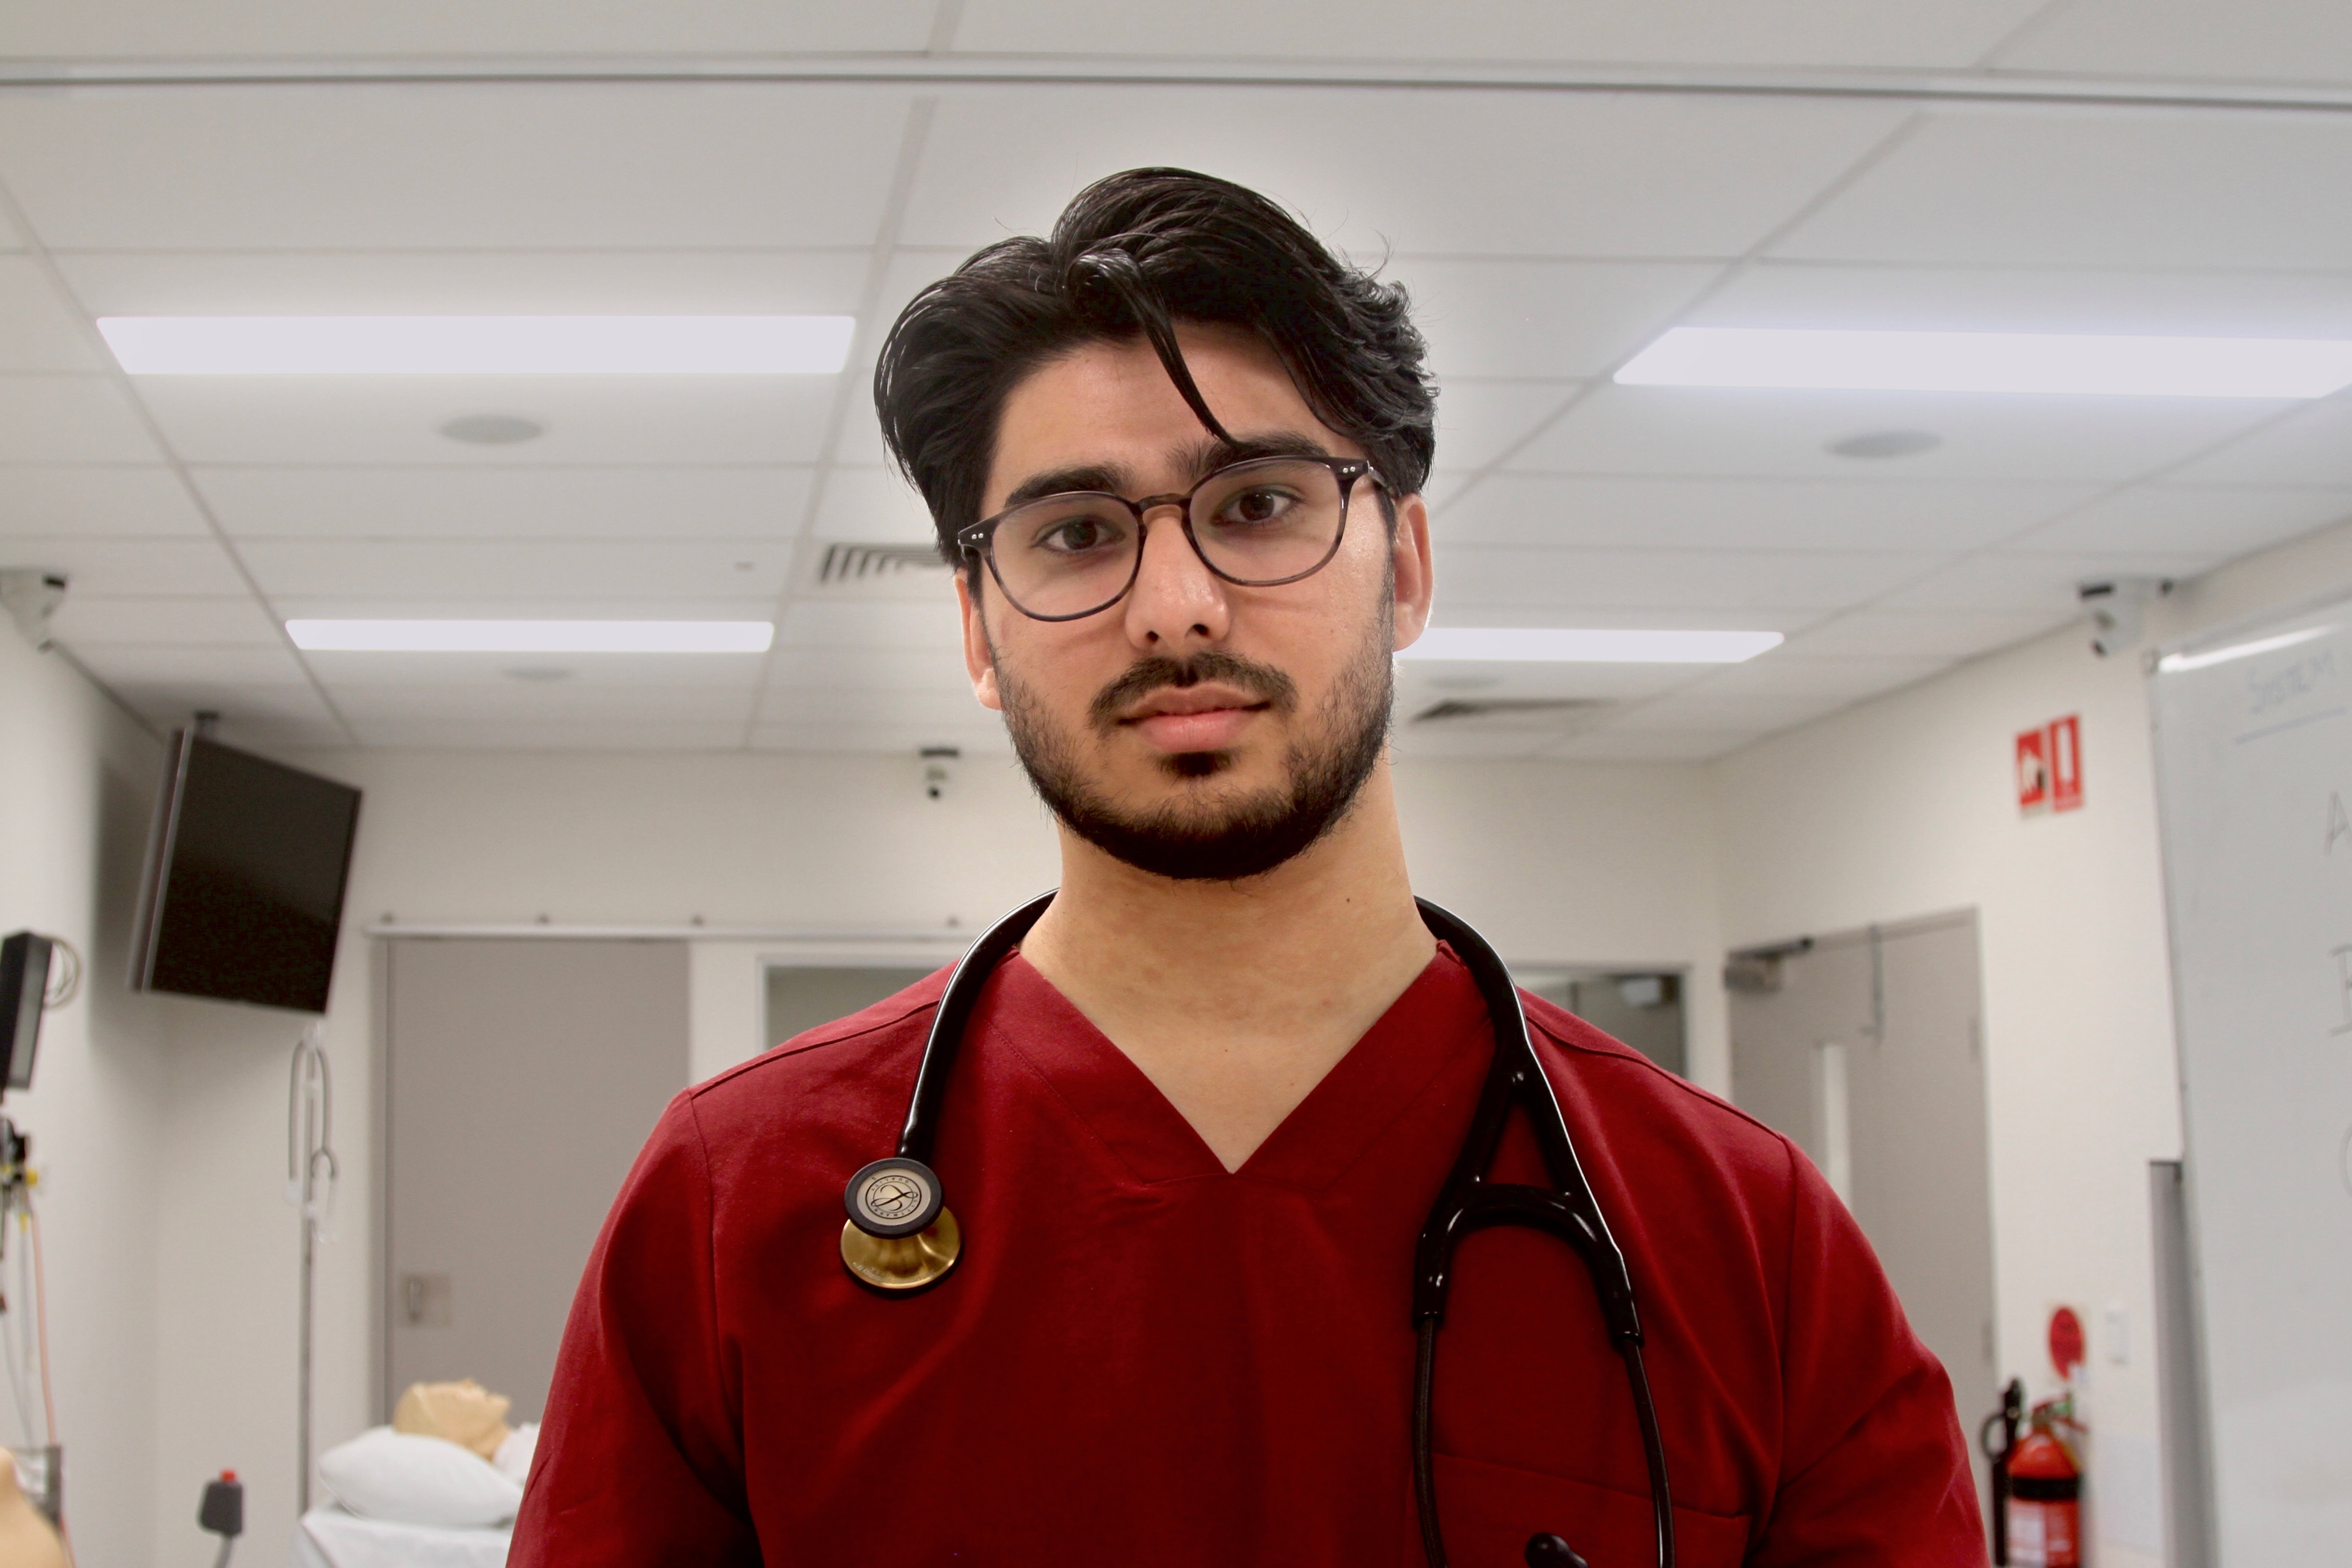 An aspiring doctor from the 'burbs takes on medical schools for elitism